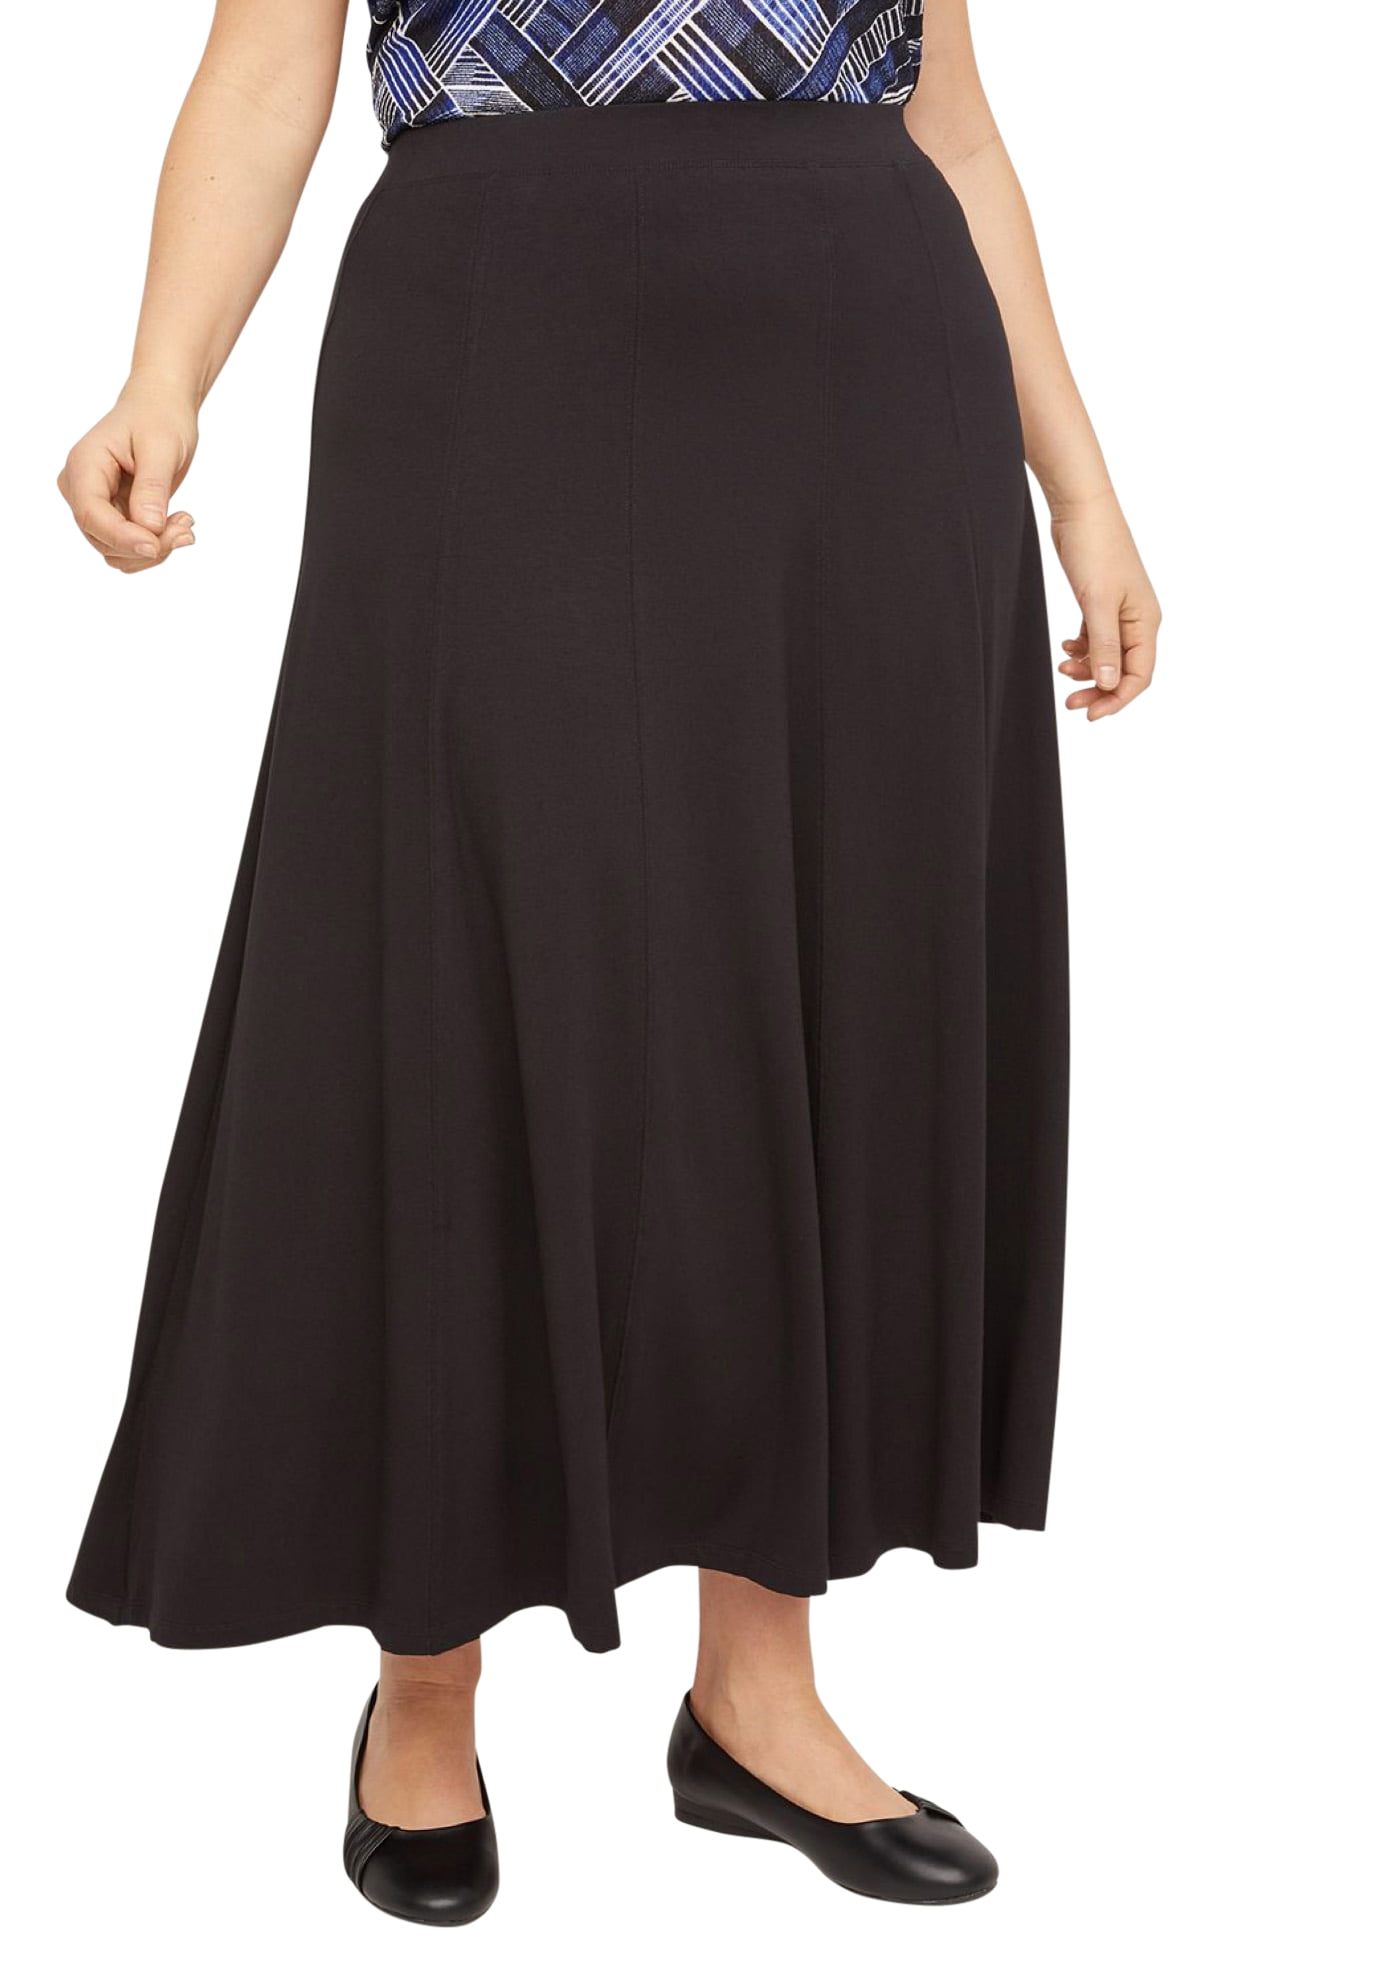 Catherines - Catherines Women's Plus Size Anywear Seamed Skirt - 1X ...